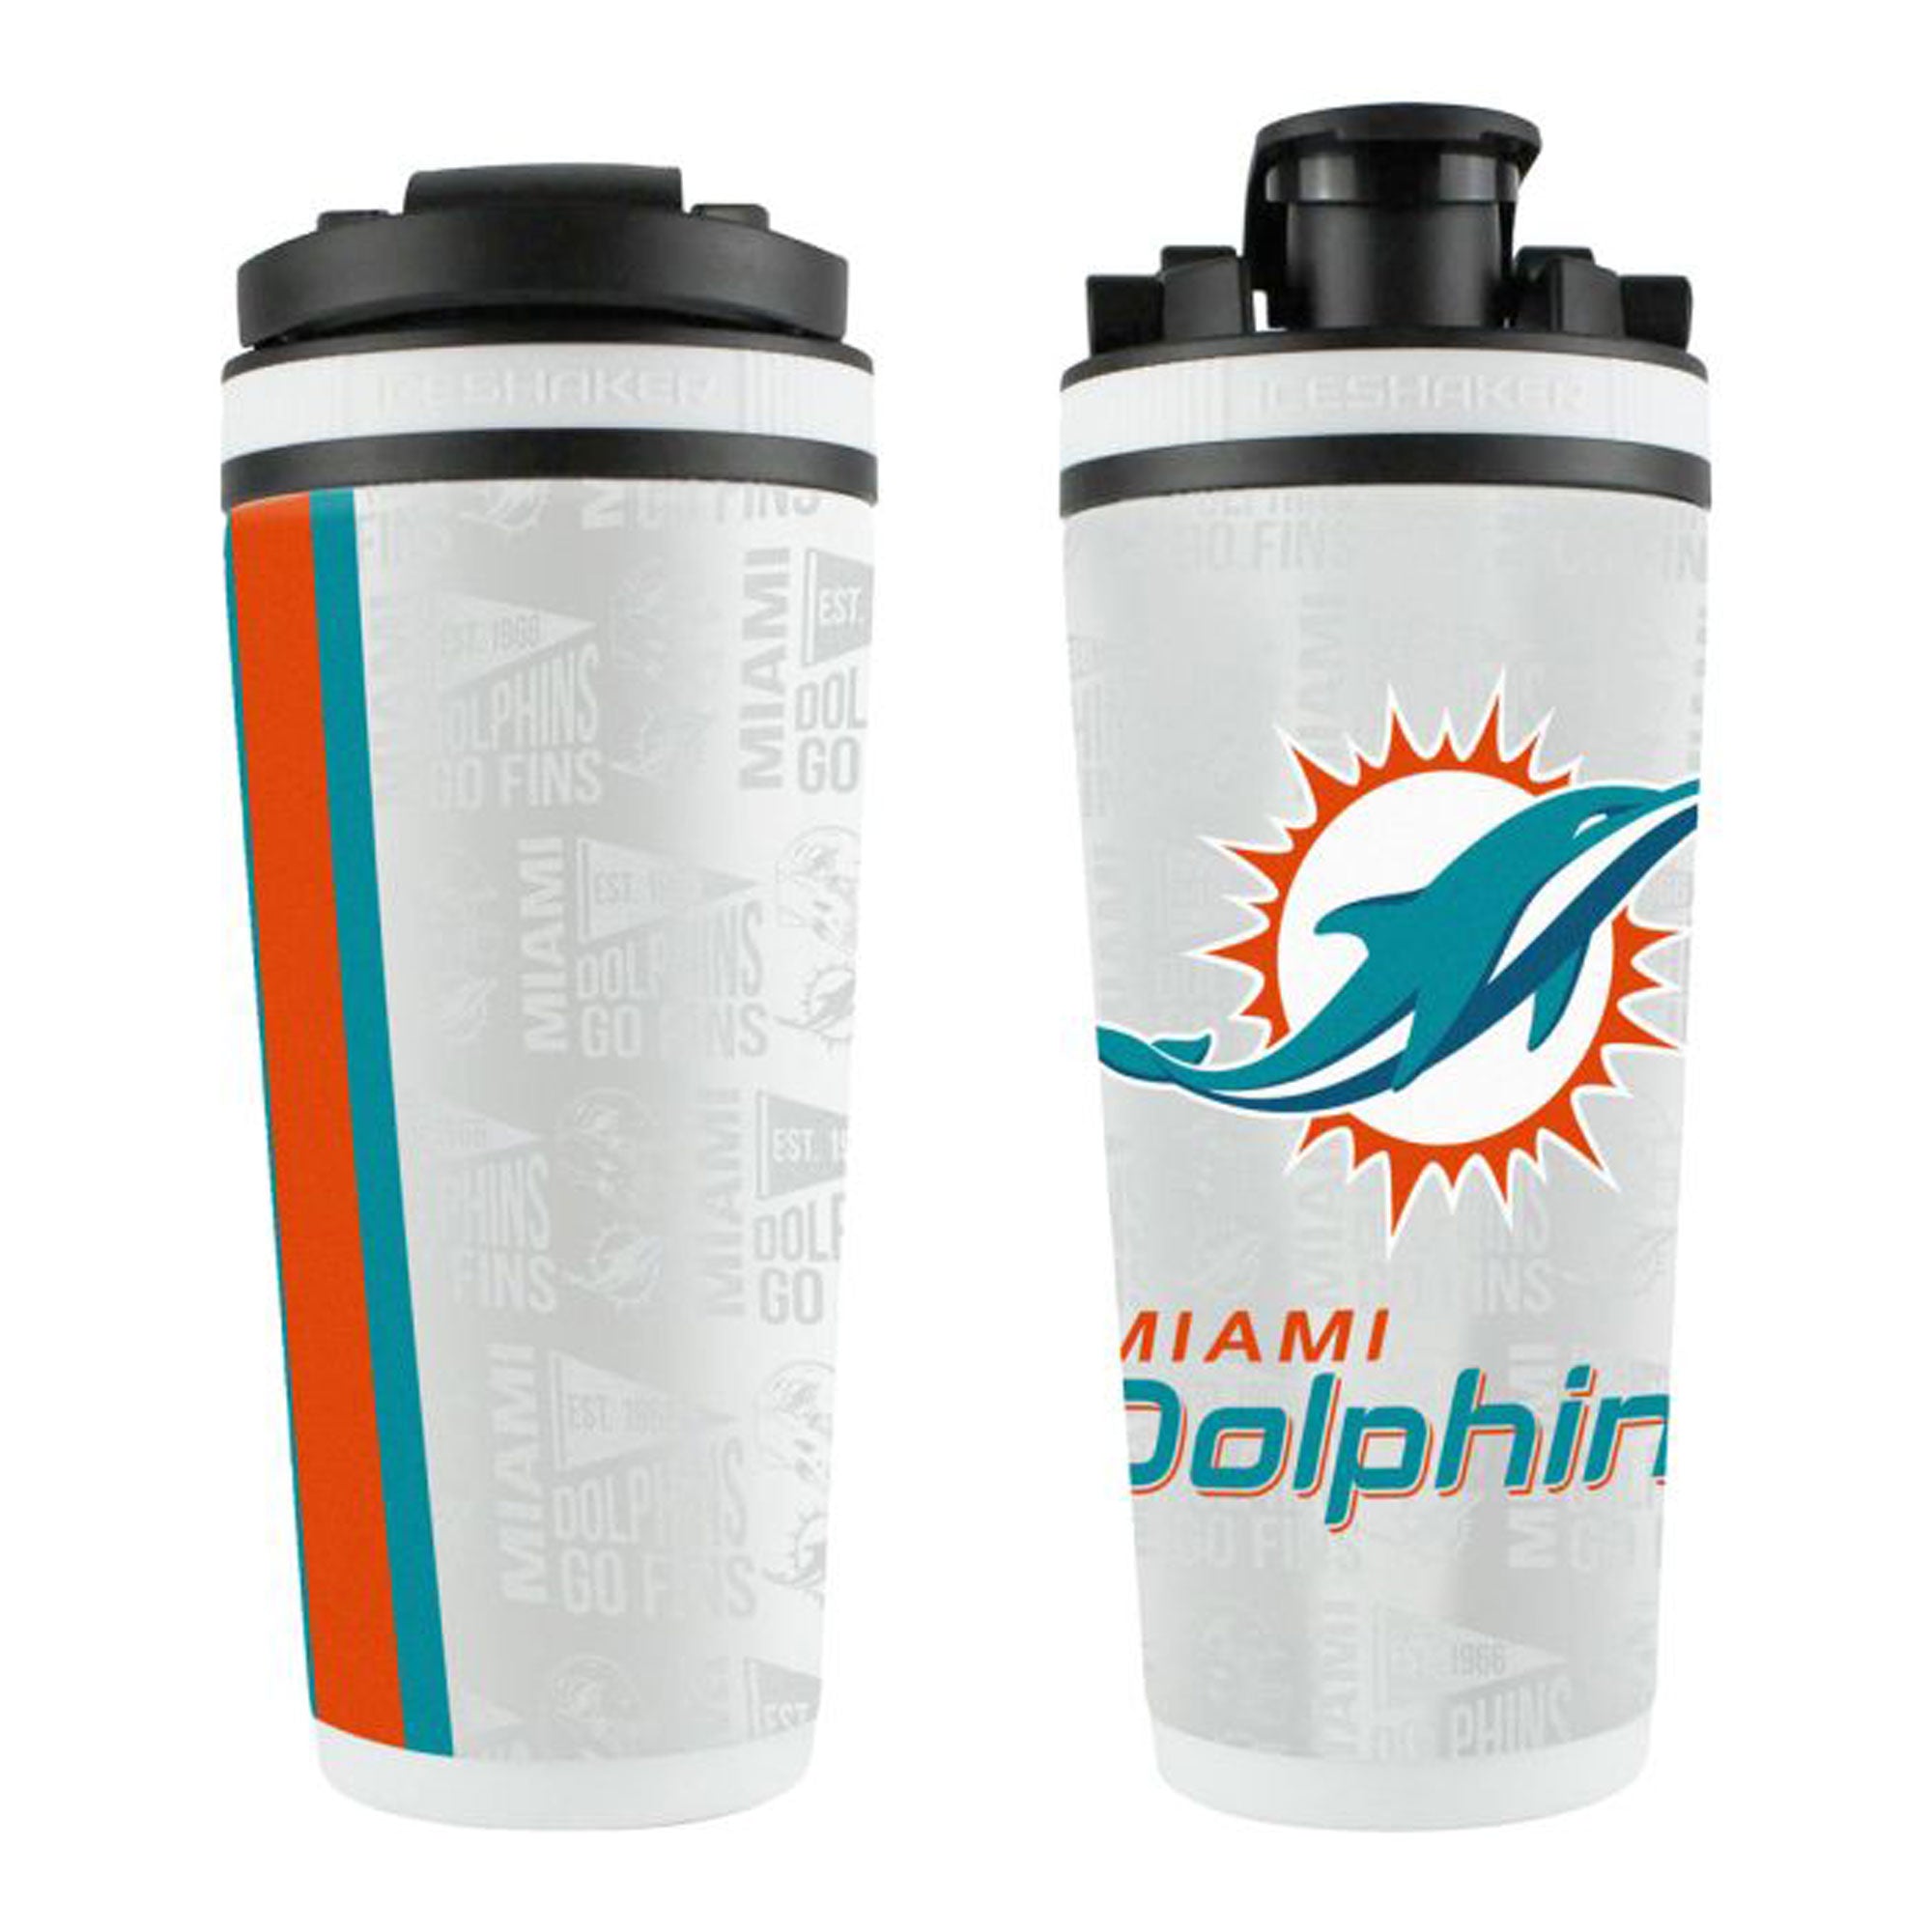 Officially Licensed Miami Dolphins 4D Ice Shaker